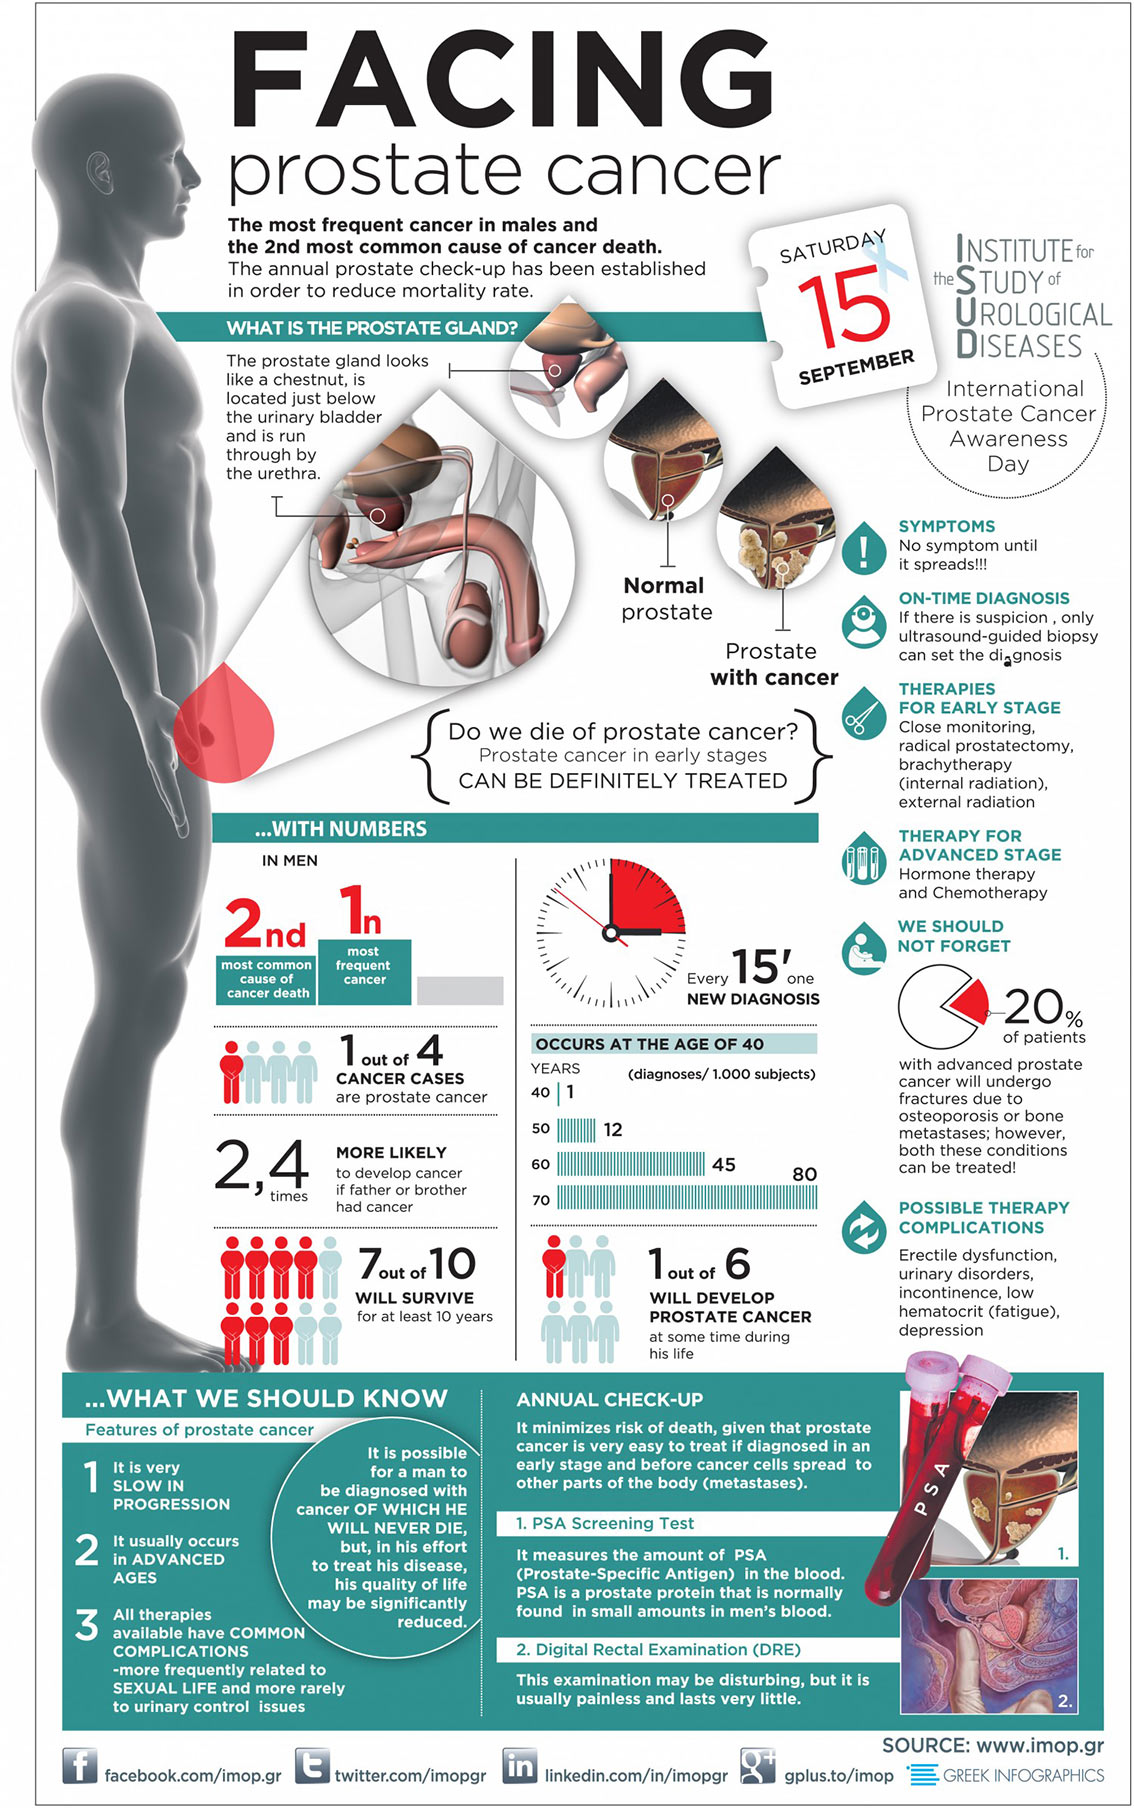 Prostate Cancer Facts and Statistics - Health Infographic